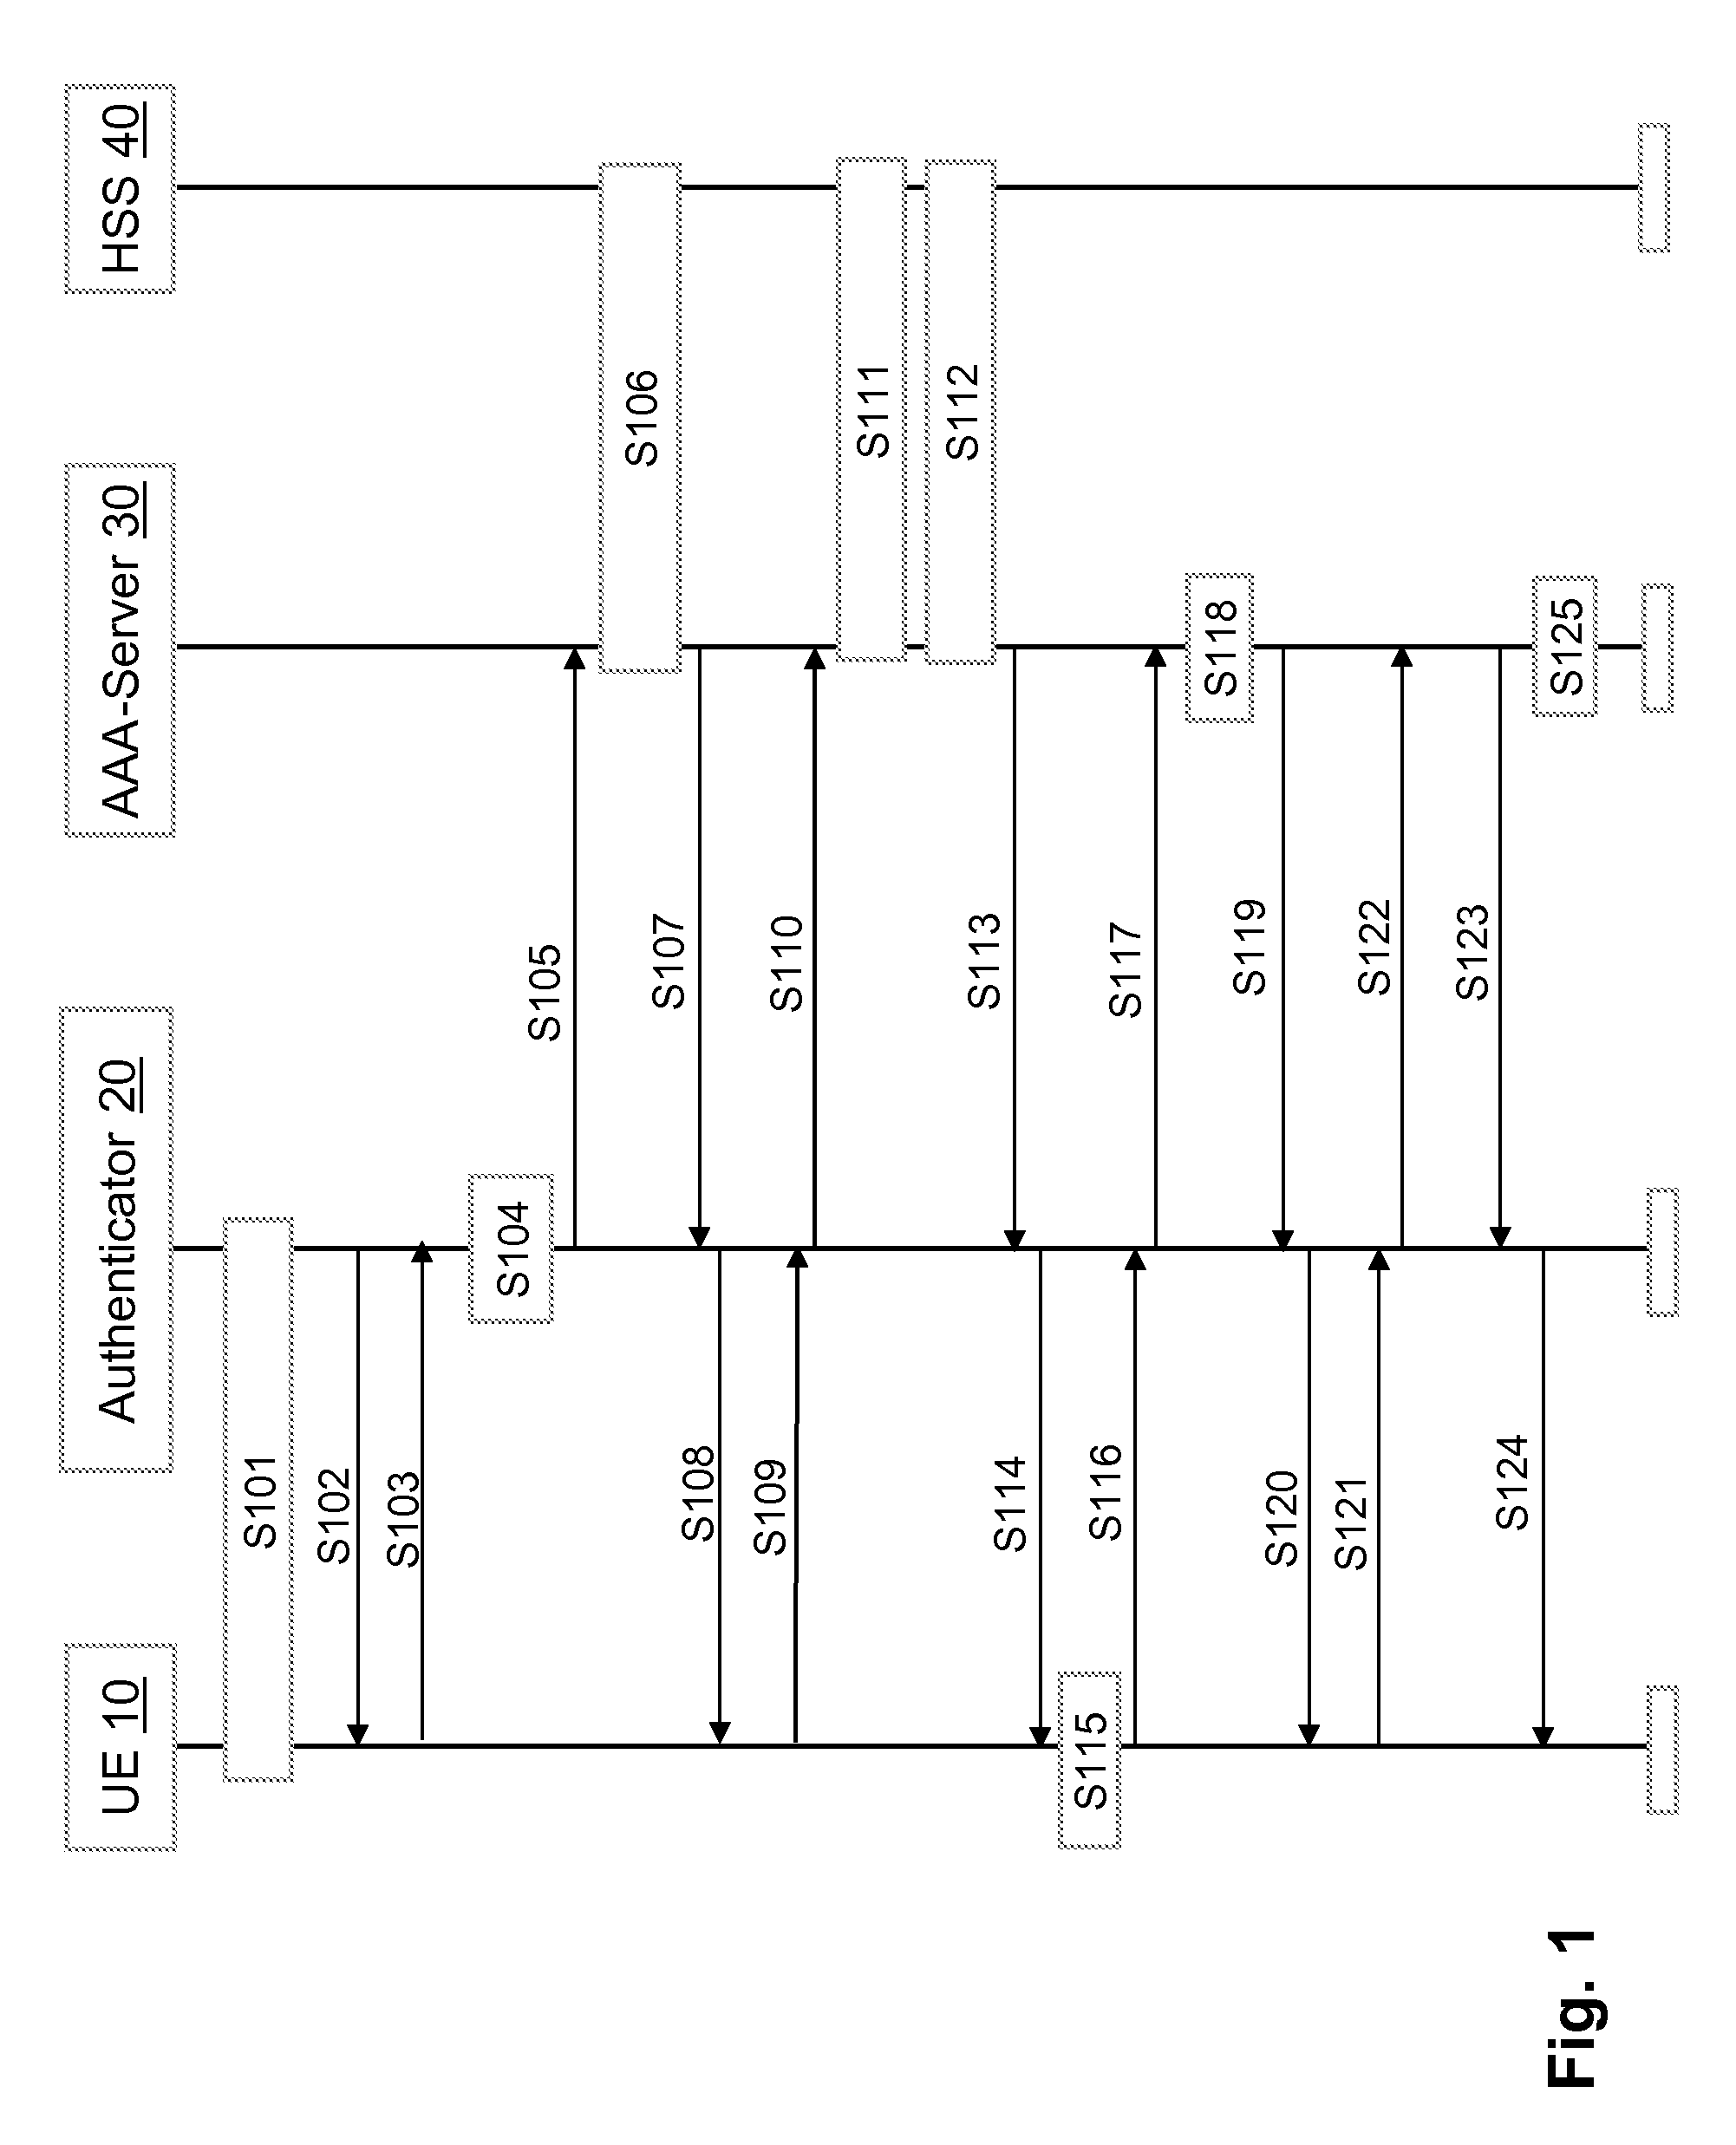 Security for a non-3gpp access to an evolved packet system